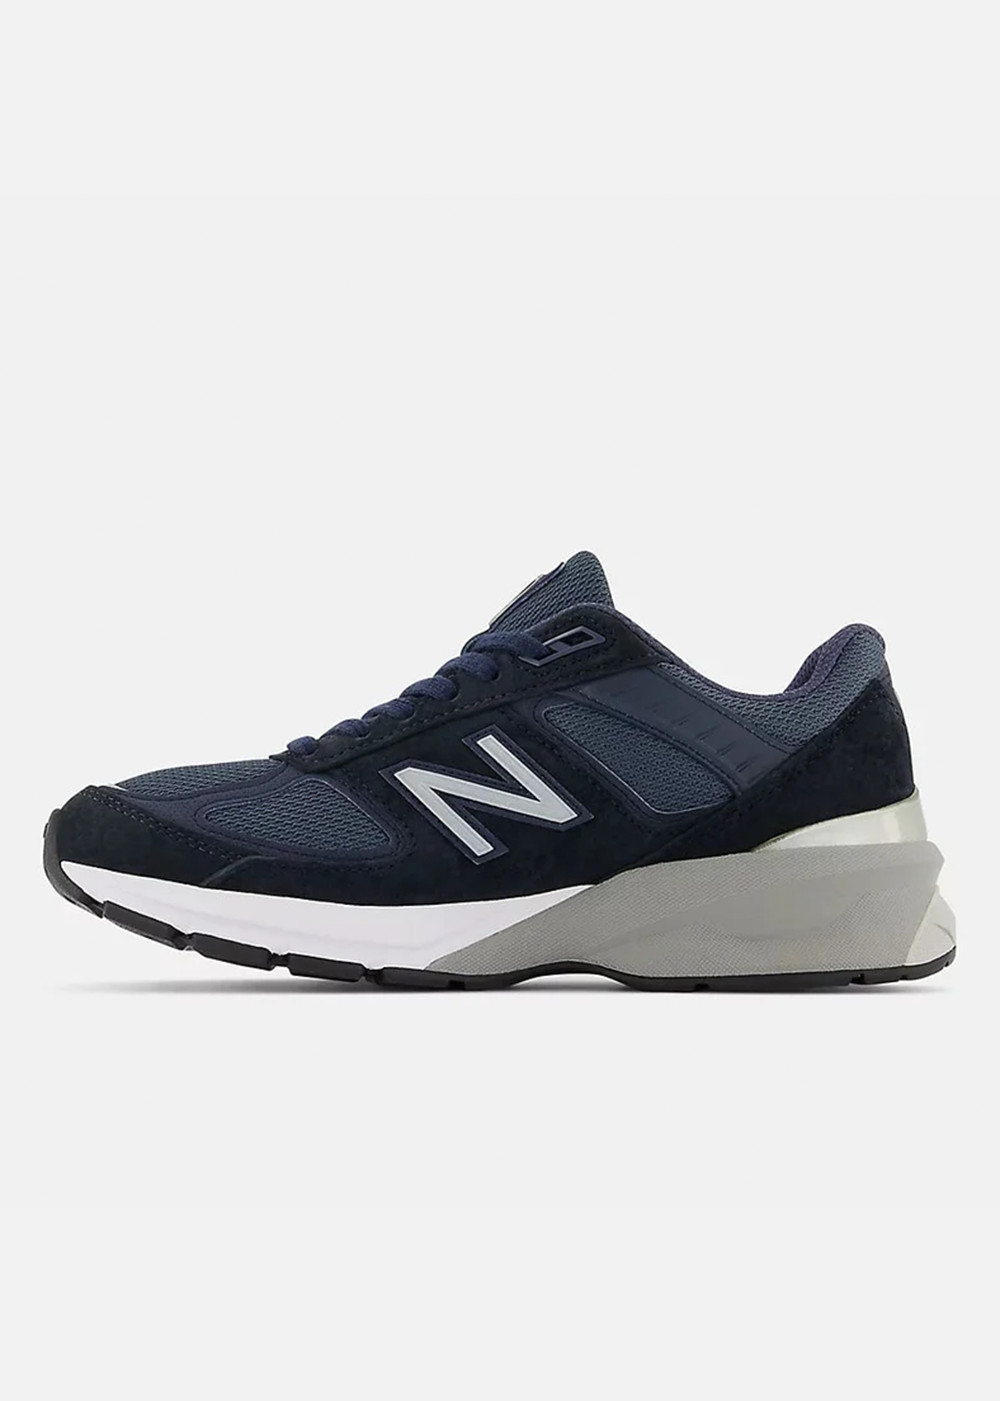 New Balance 990v5 Unisex Made in USA Sneakers - Navy